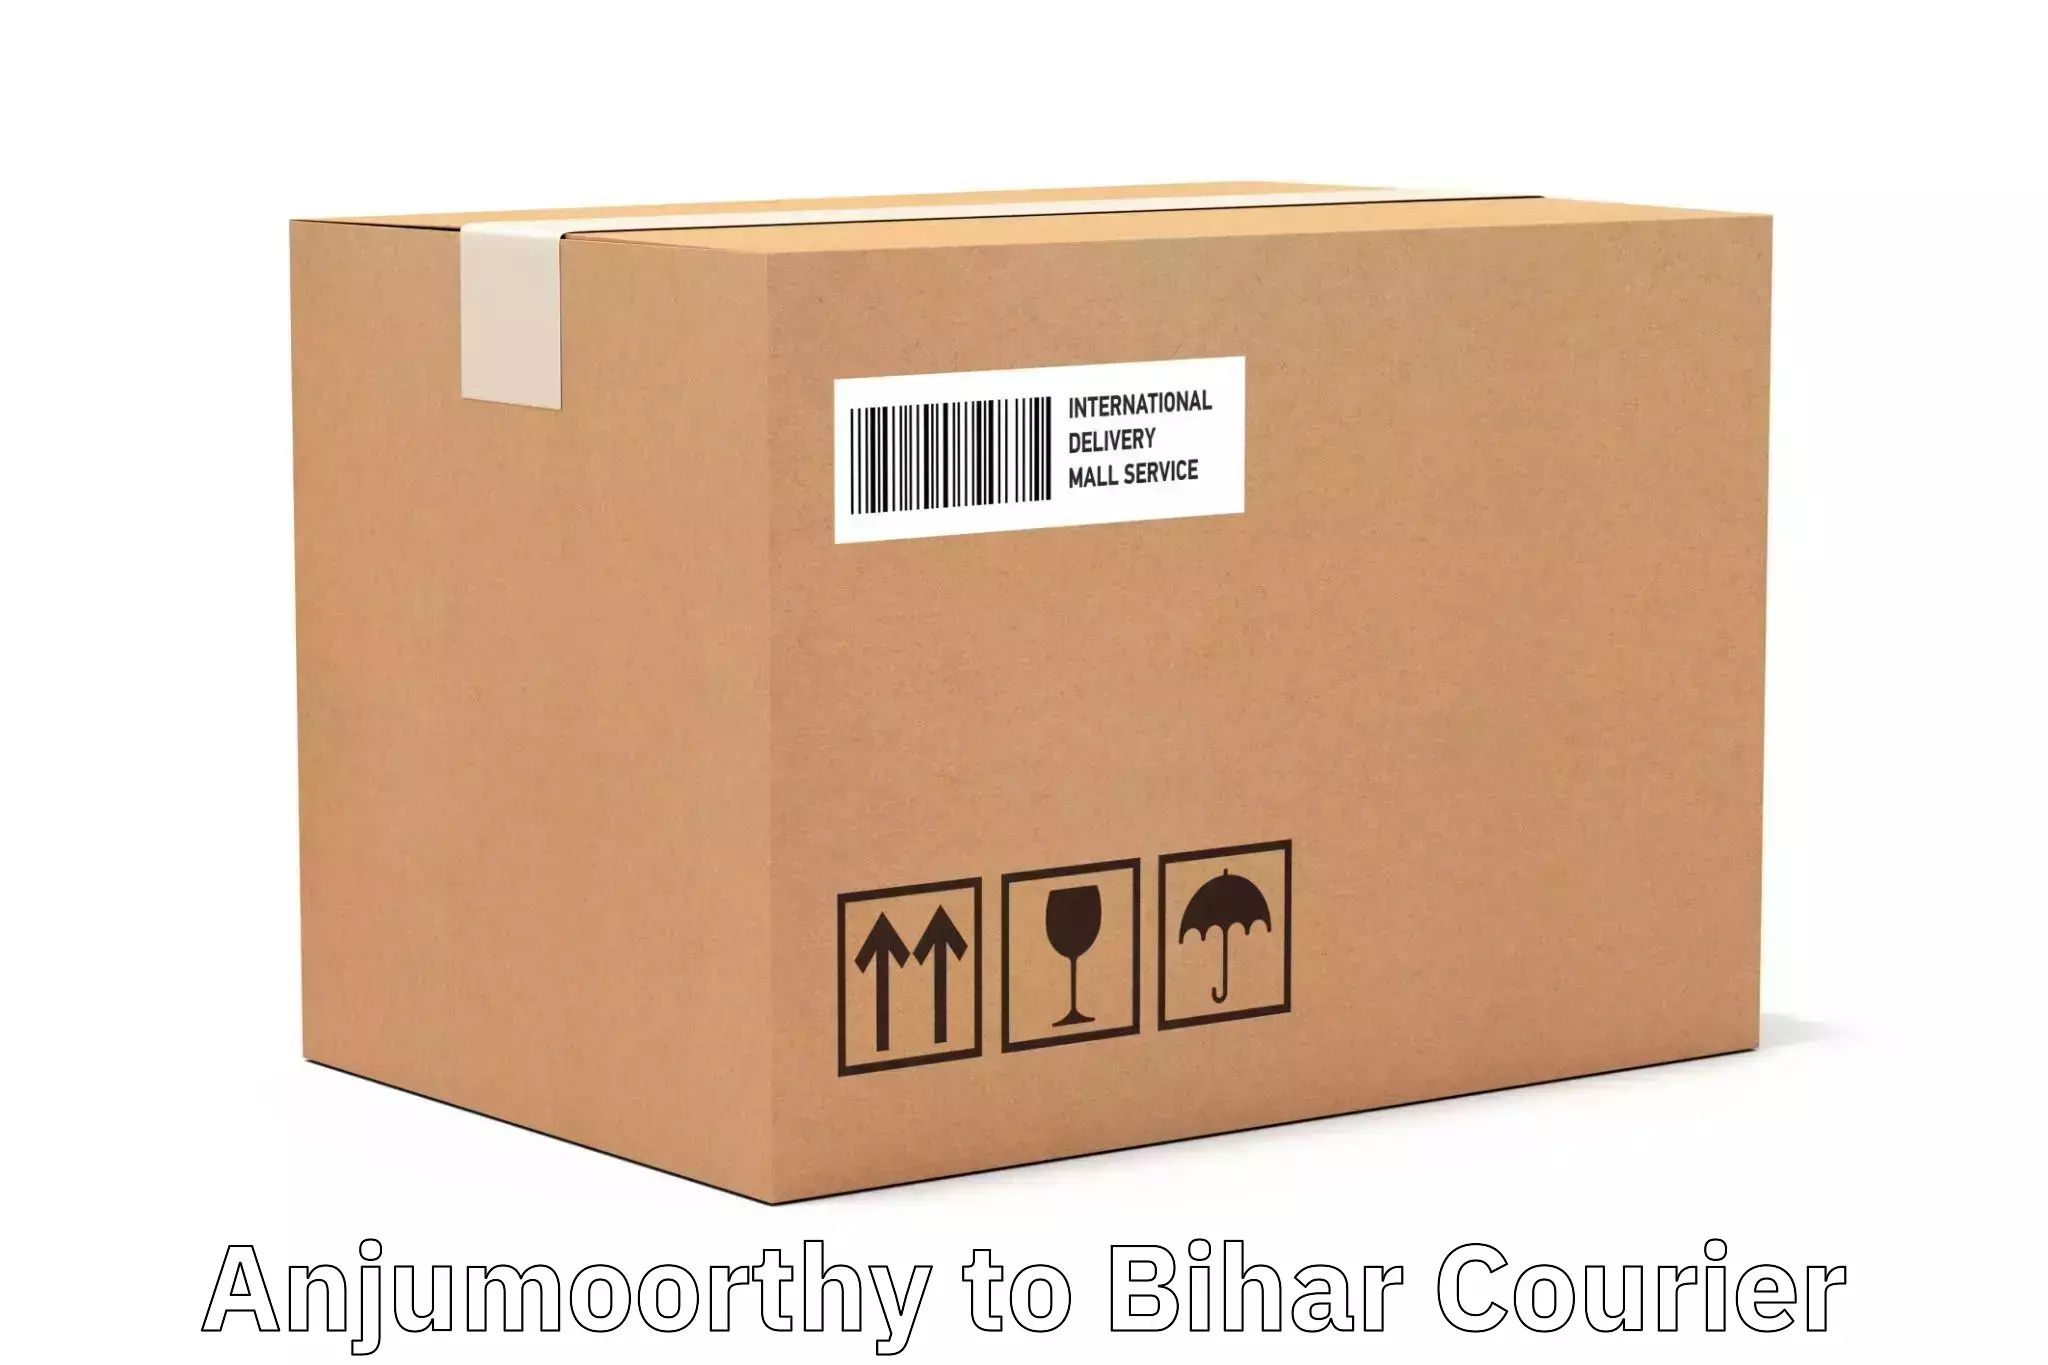 Multi-national courier services Anjumoorthy to Rajgir